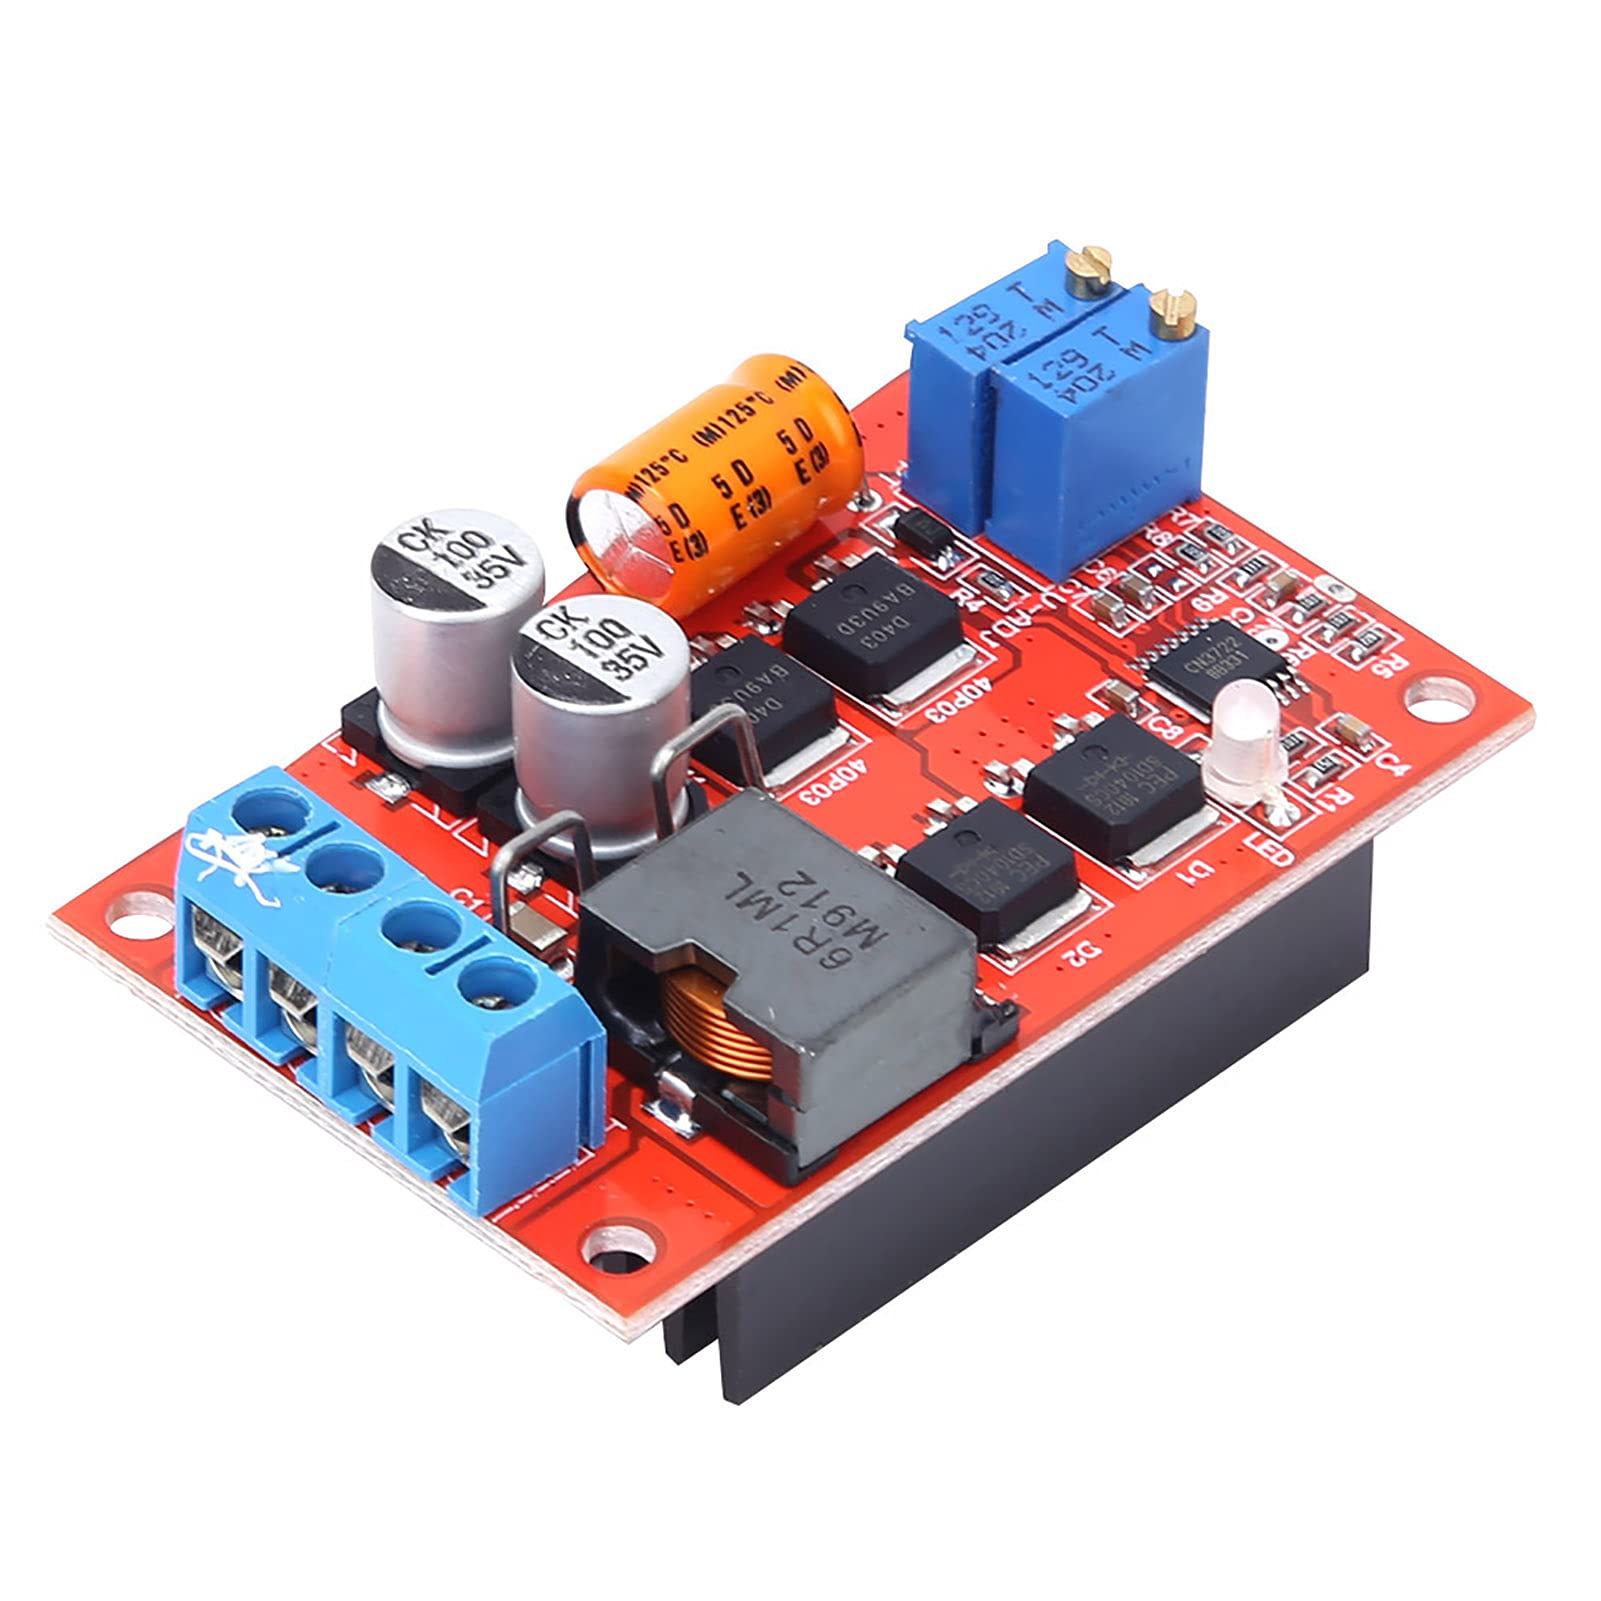 MPPT Solar Panel Regulator Module Charging Controller Boost Converter Module with Automatic Intelligent Three Stage Charging Mode 5A